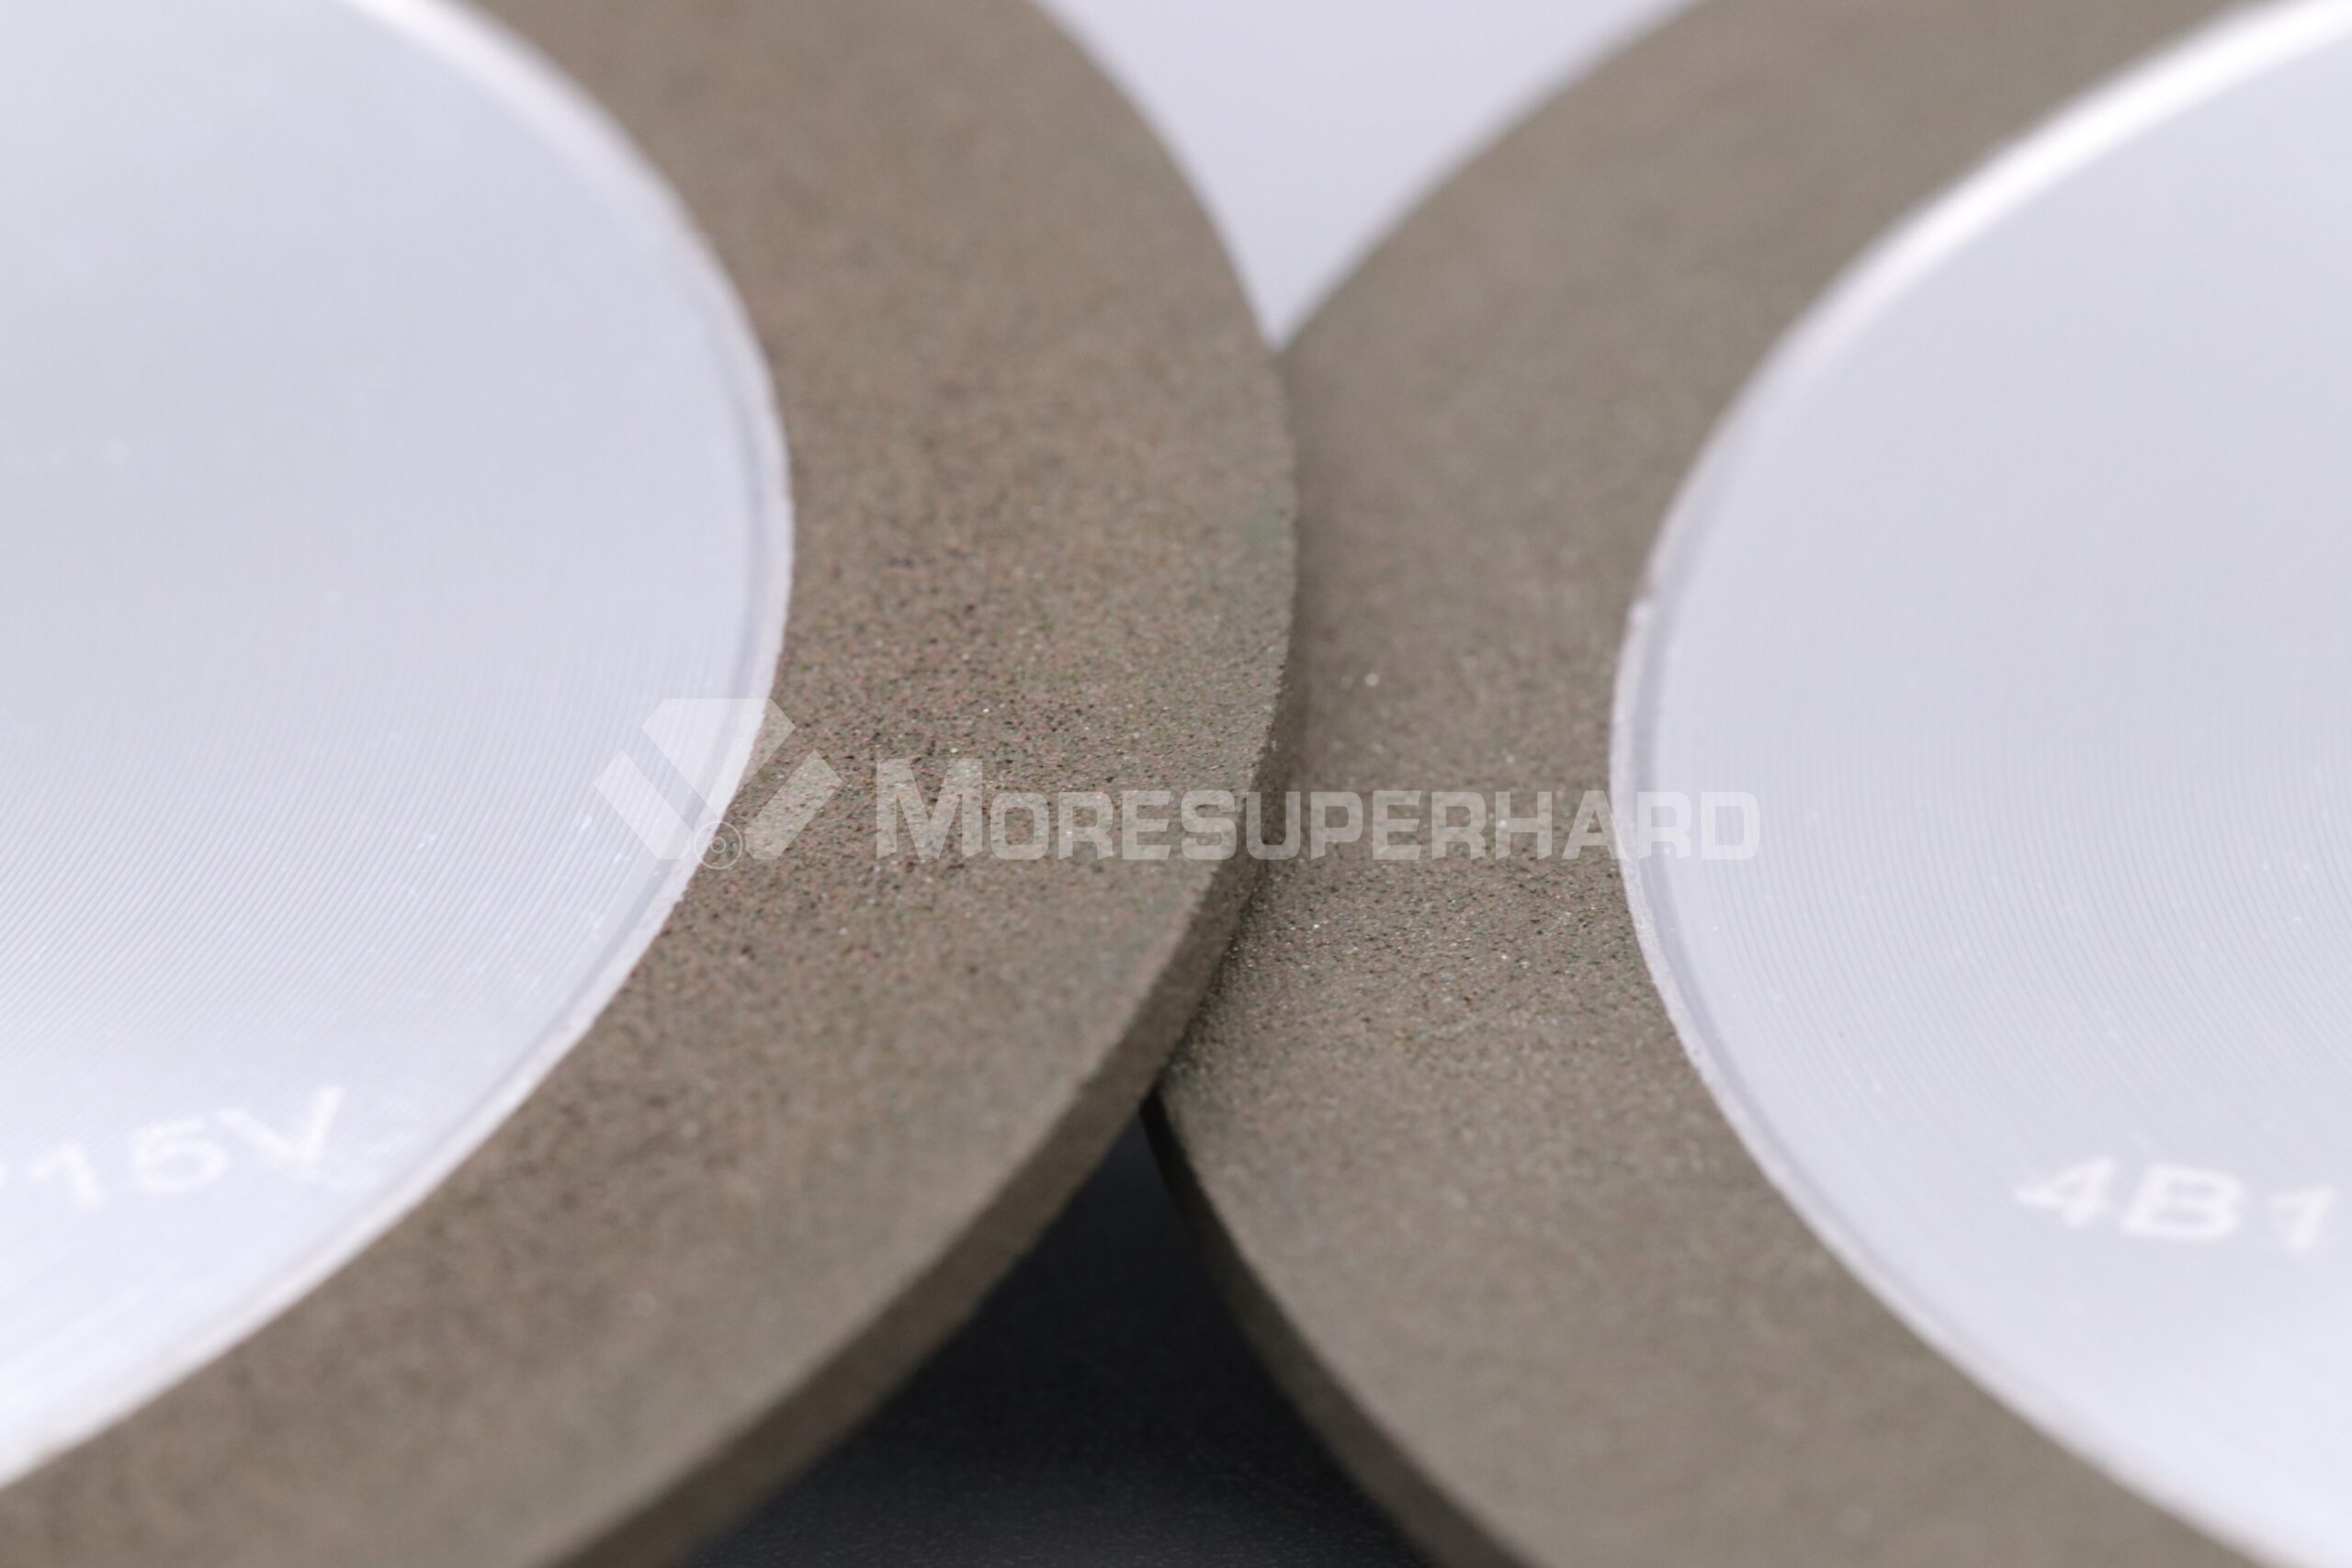 4B2 Resin Grinding Wheels for Tungsten Carbide